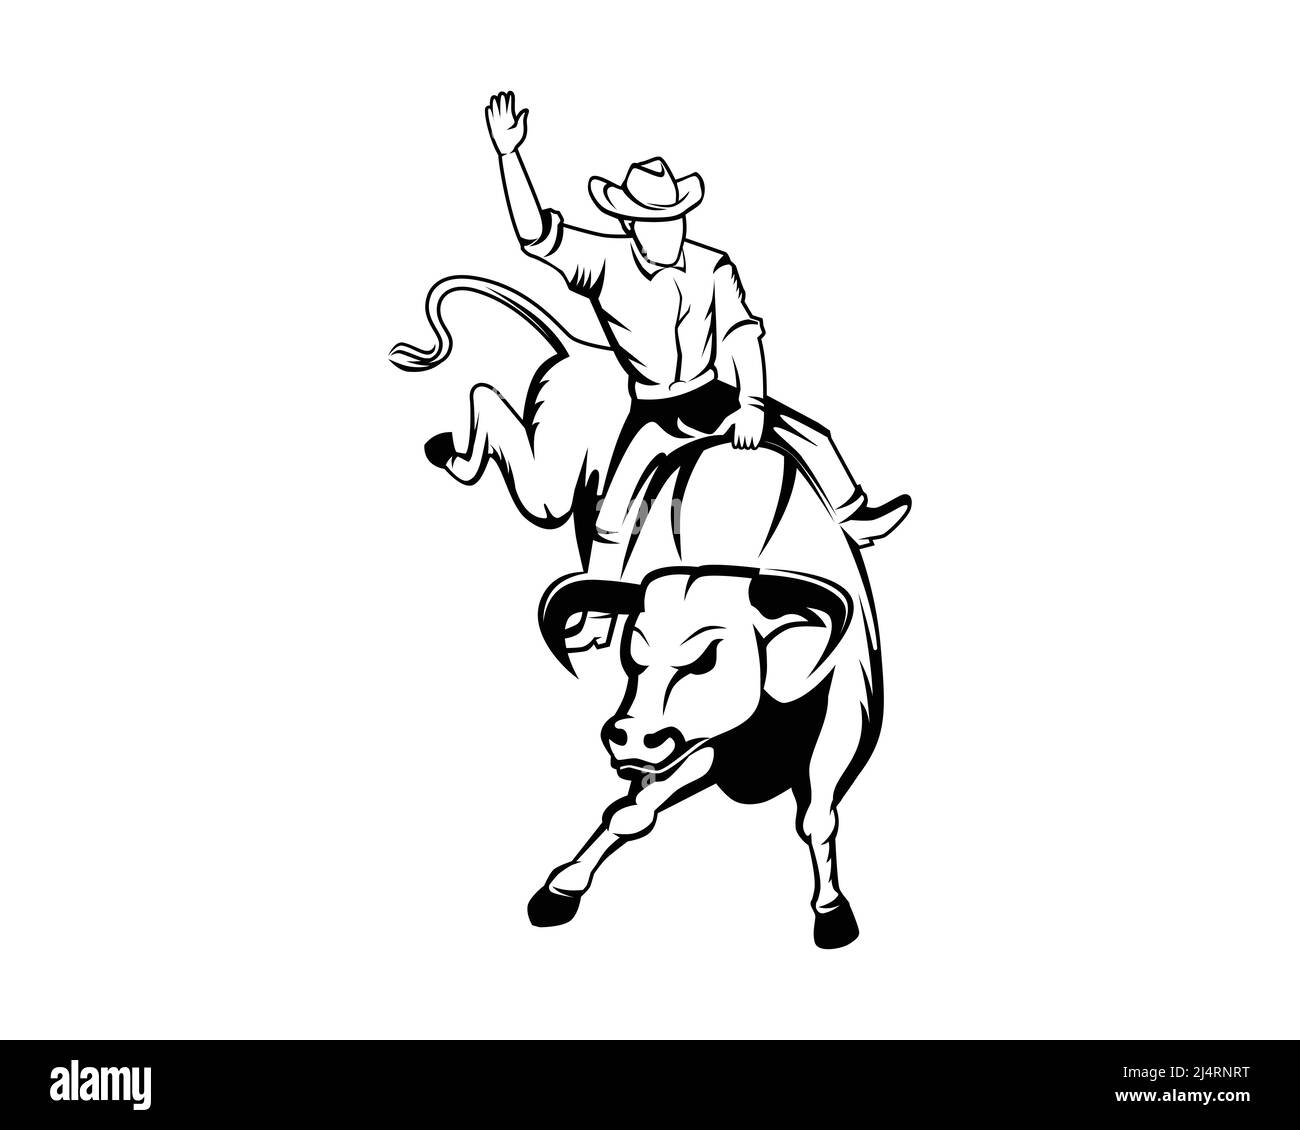 Rodeo or Cowboy Riding a Wild and Furious Bull Illustration with Silhouette Style Vector Stock Vector